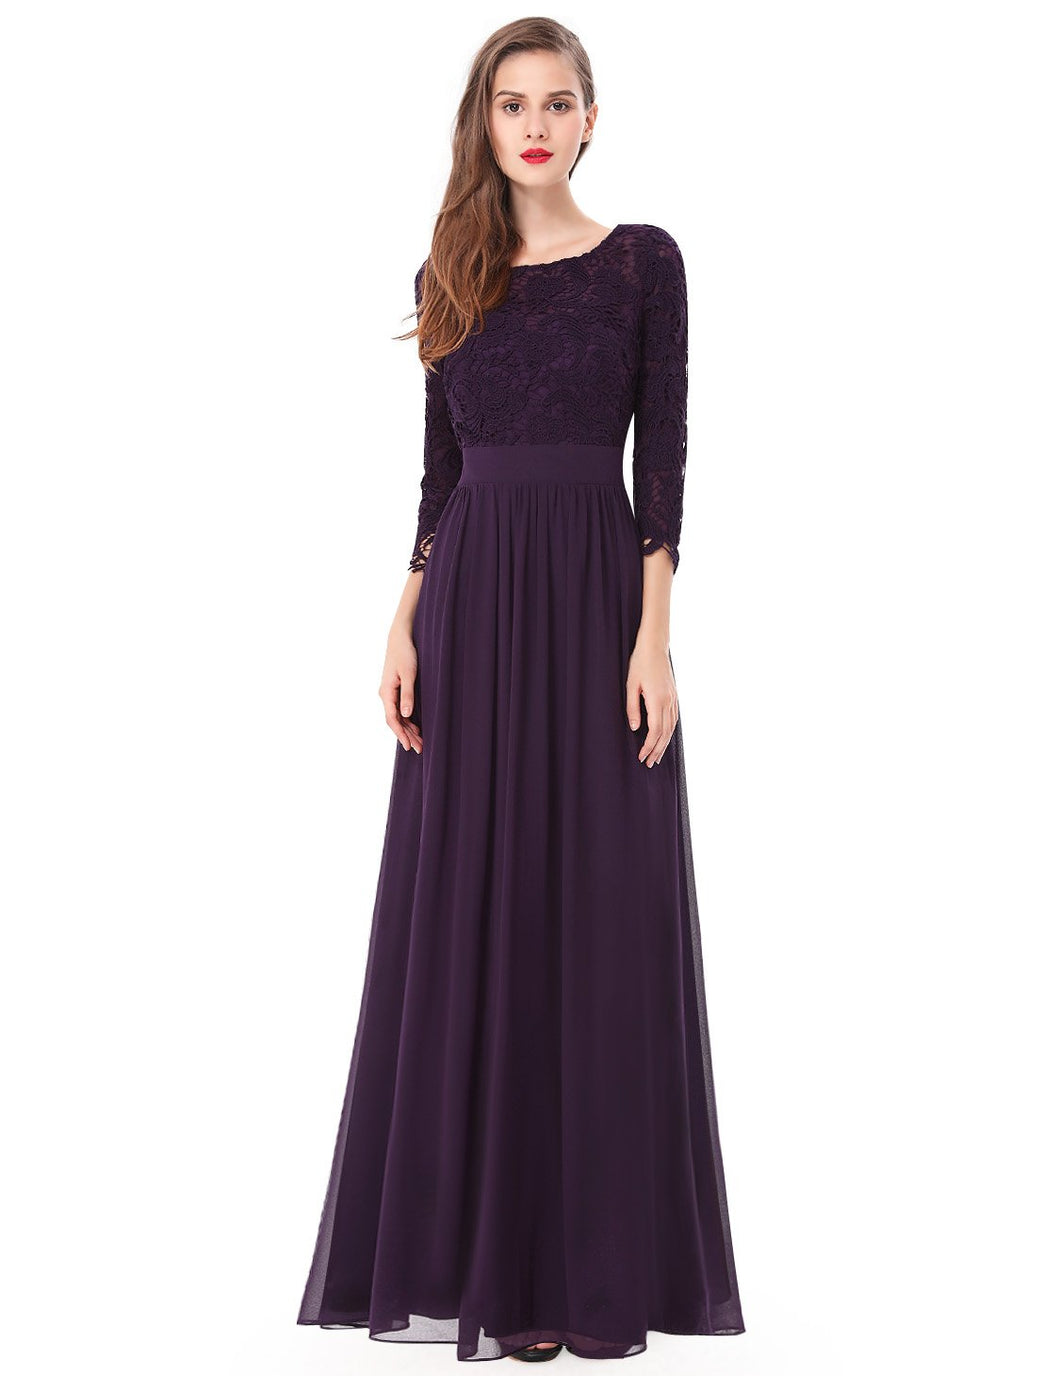 Ever-Pretty Sexy Women's Elegant 3/4 Sleeve V Back Lace Long Evening Dress EP08412